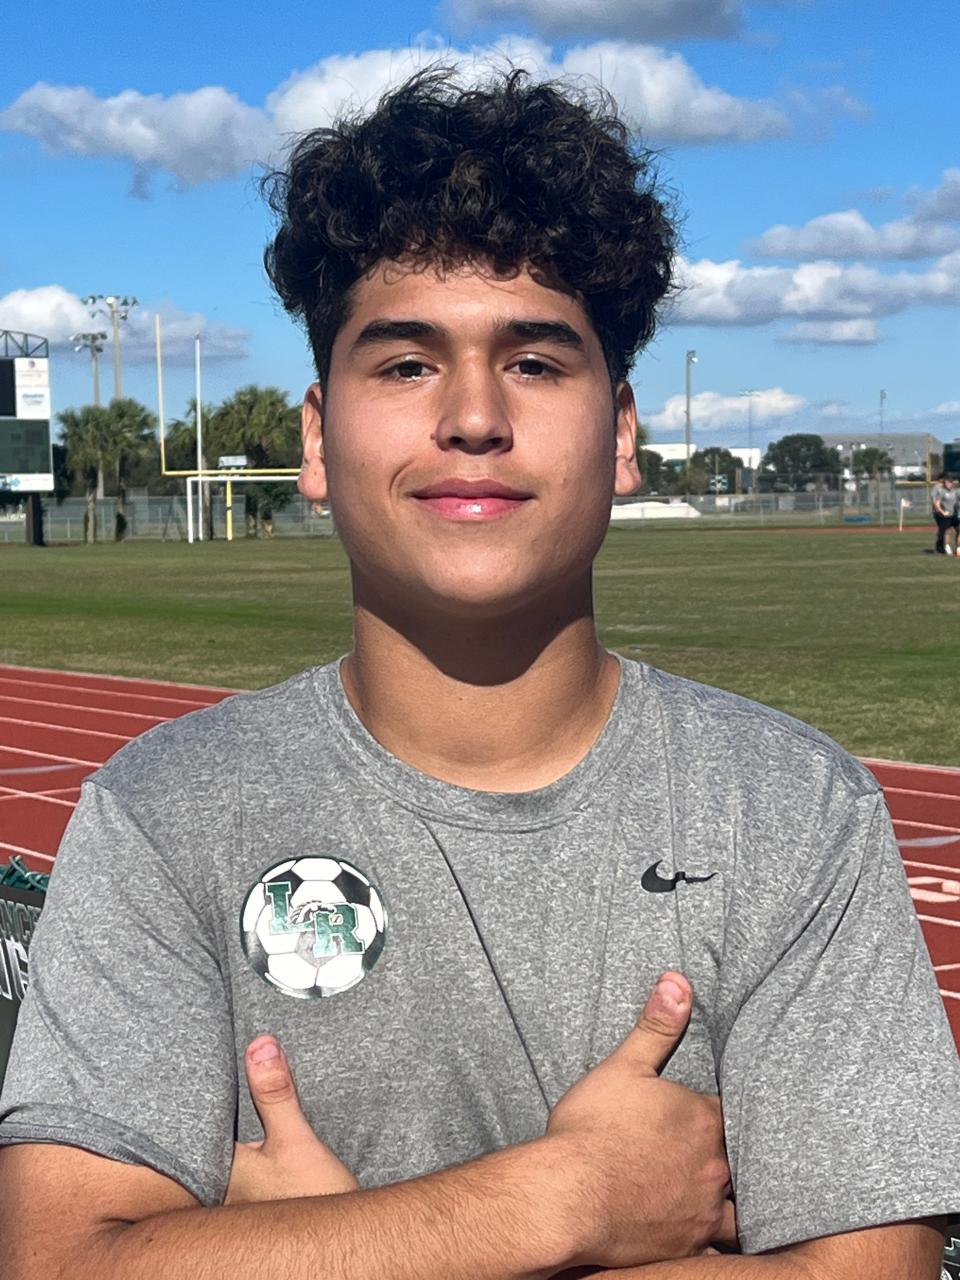 Lakewood Ranch High senior Diego Freyre scored the lone goal of the match as the Mustangs defeated Jesuit, 1-0, in the semifinal round of the Tampa Bay Invitational on Friday in Tampa.